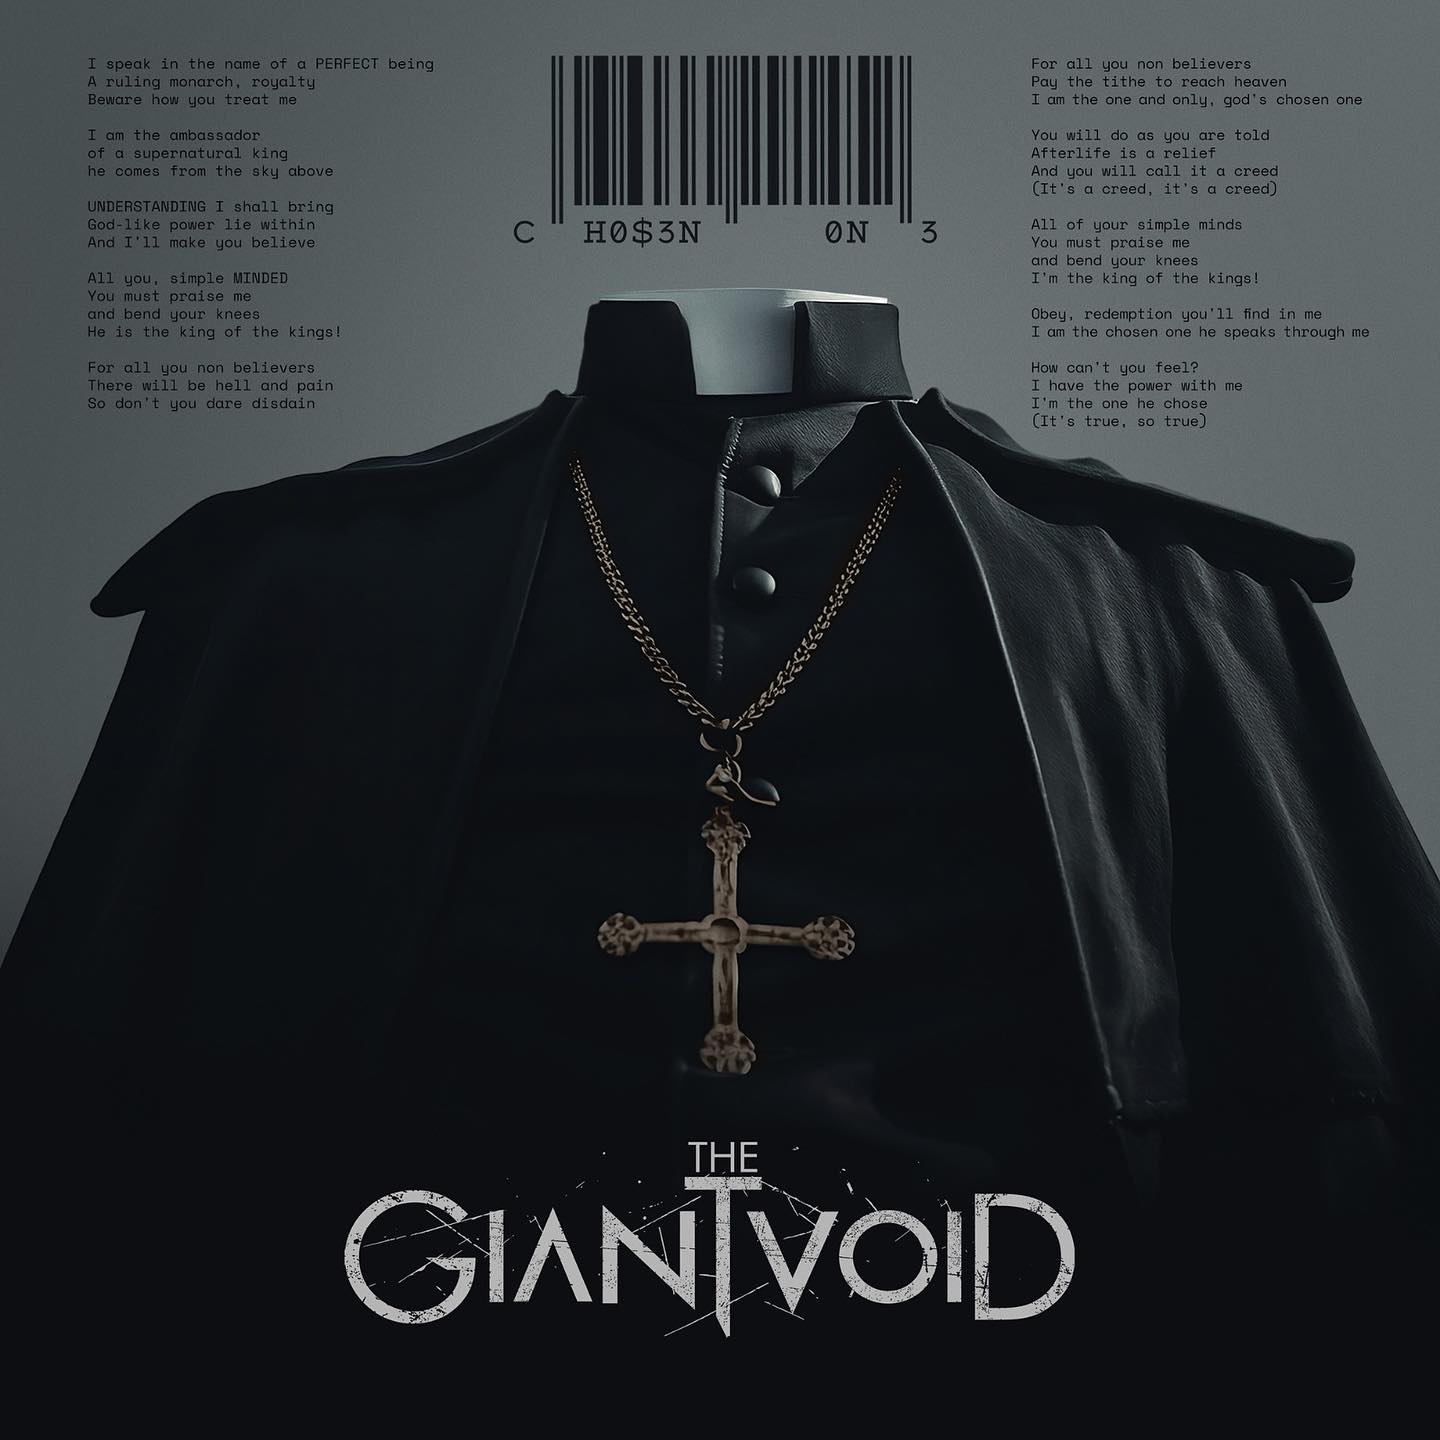 The Giant Void - Chosen One